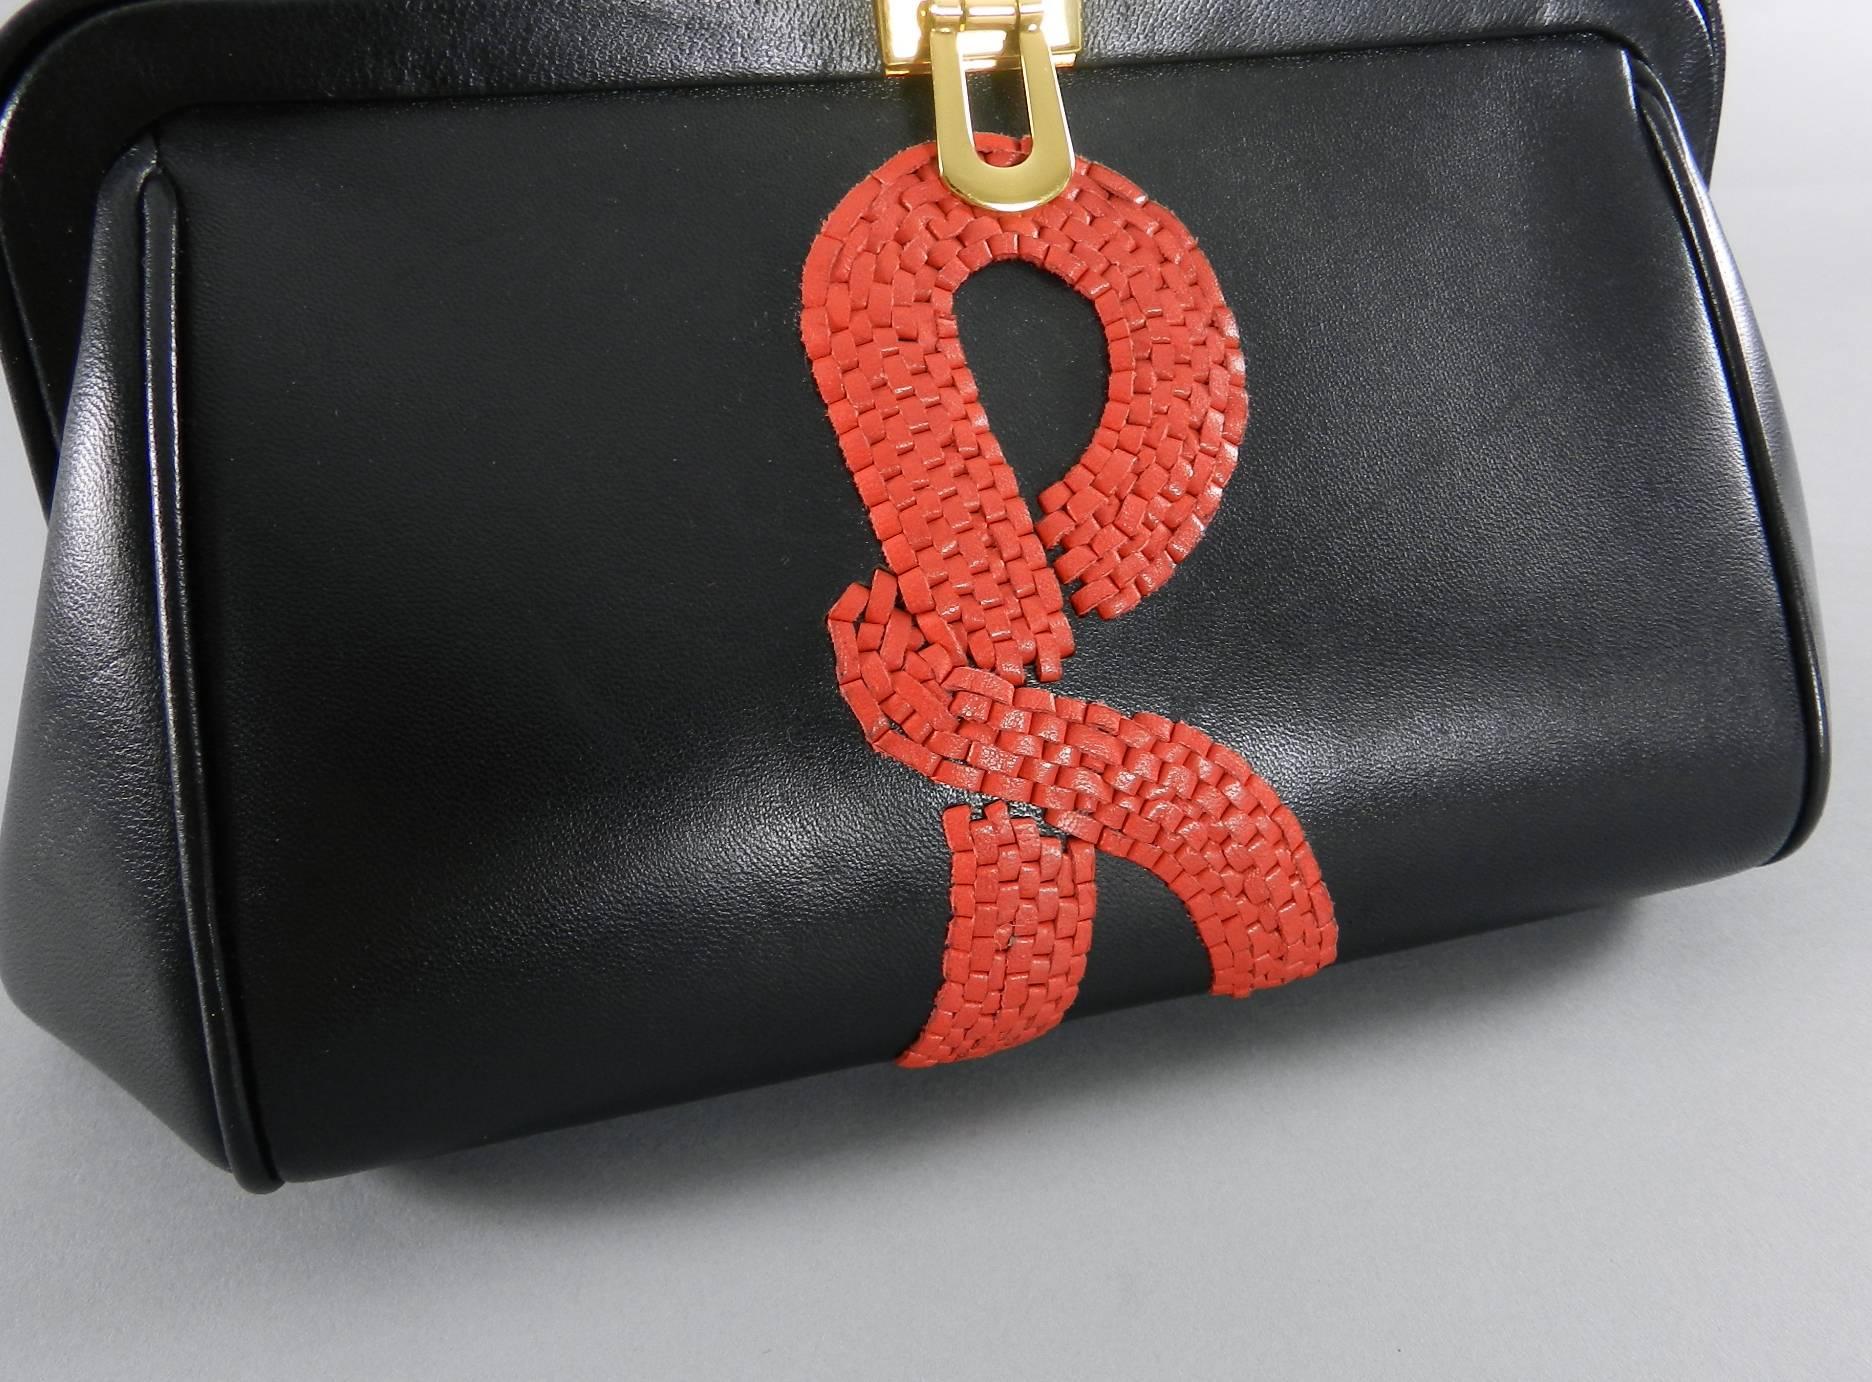 Black Roberta di Camerino vintage style leather bag with red Woven R logo